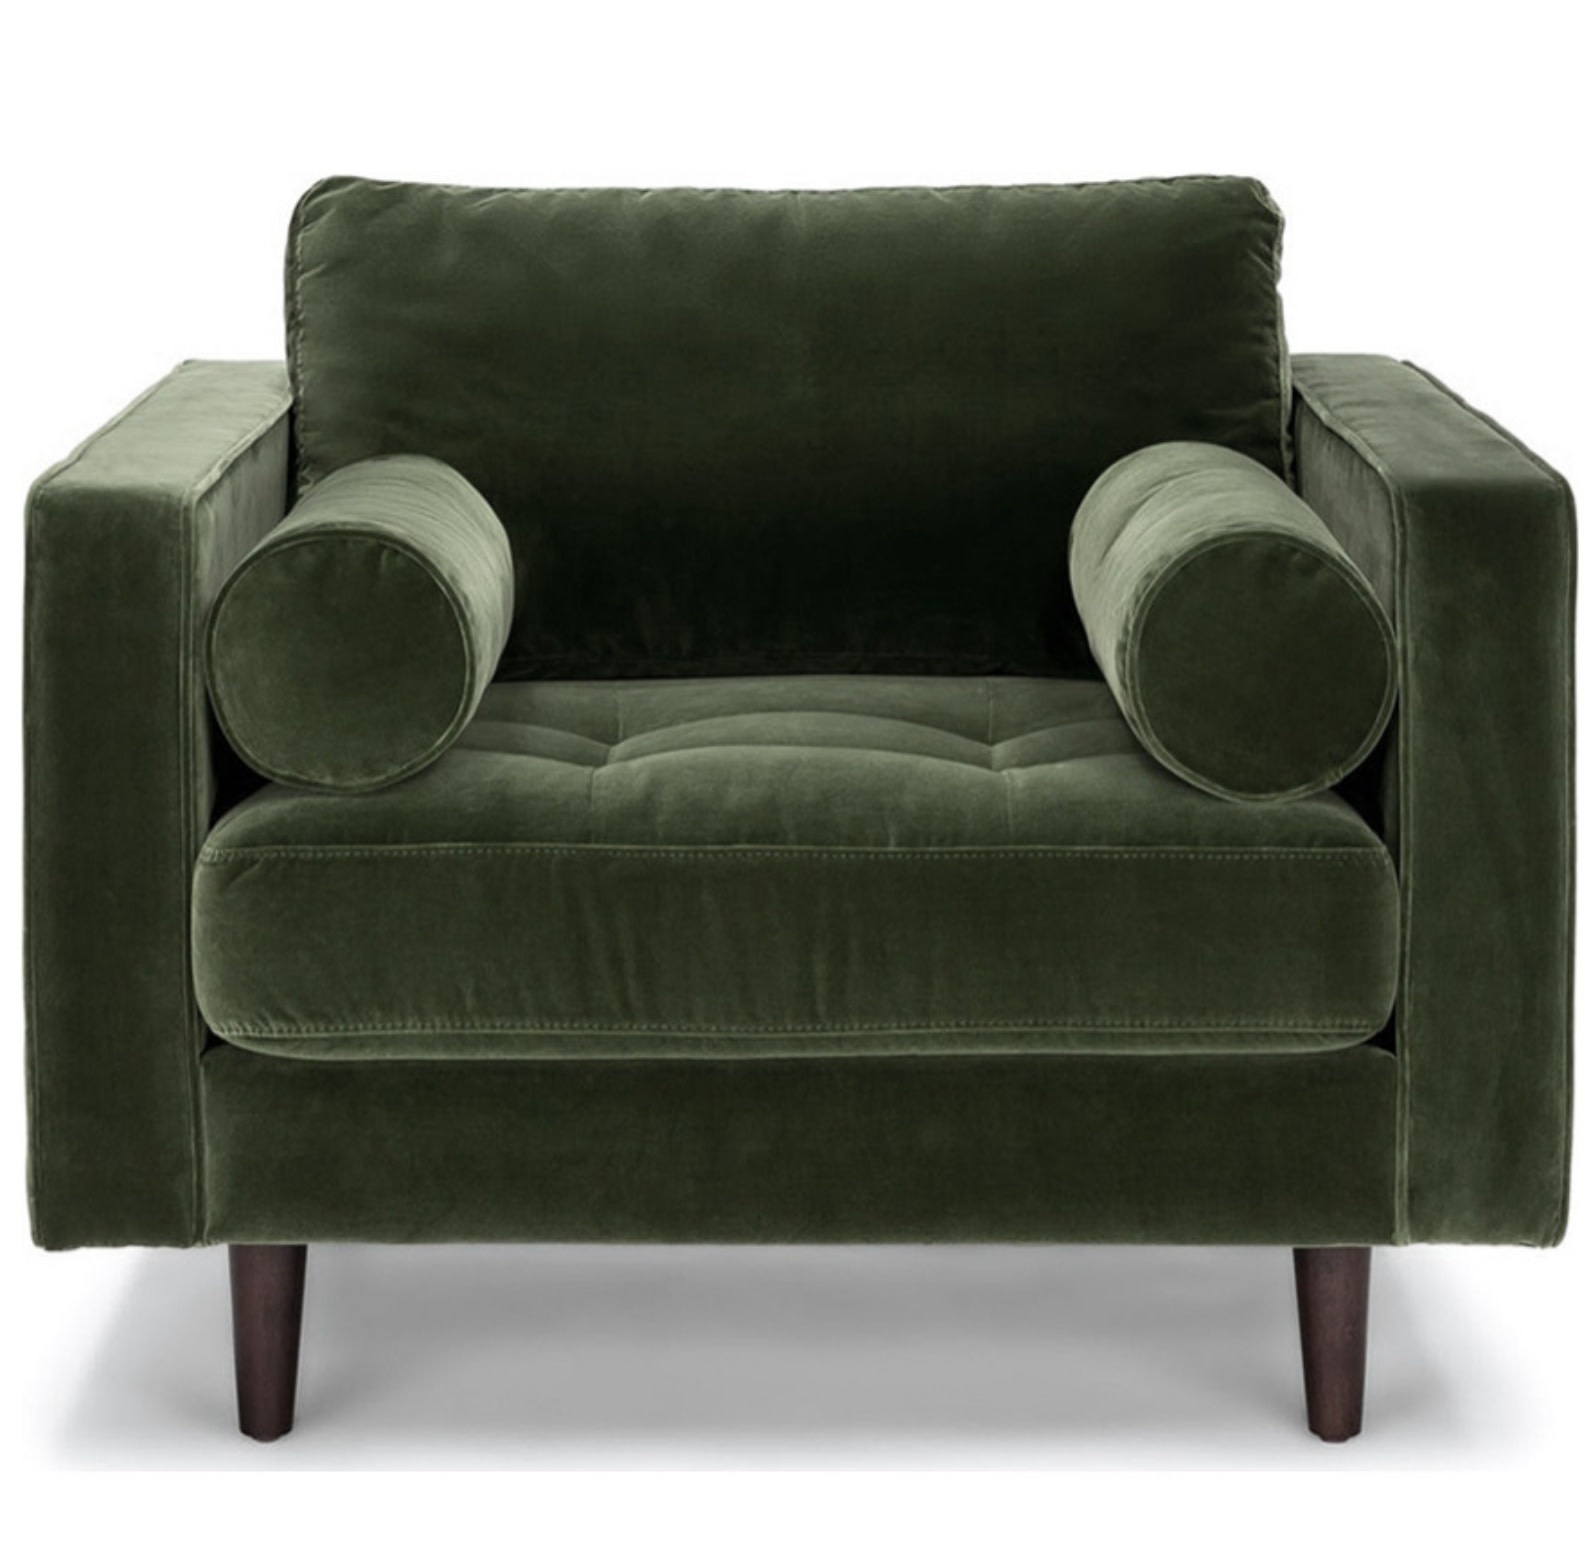 Roma Chair in Green Velvet, 42 x 38 x 37 Furniture Available for Local Delivery or Pick Up